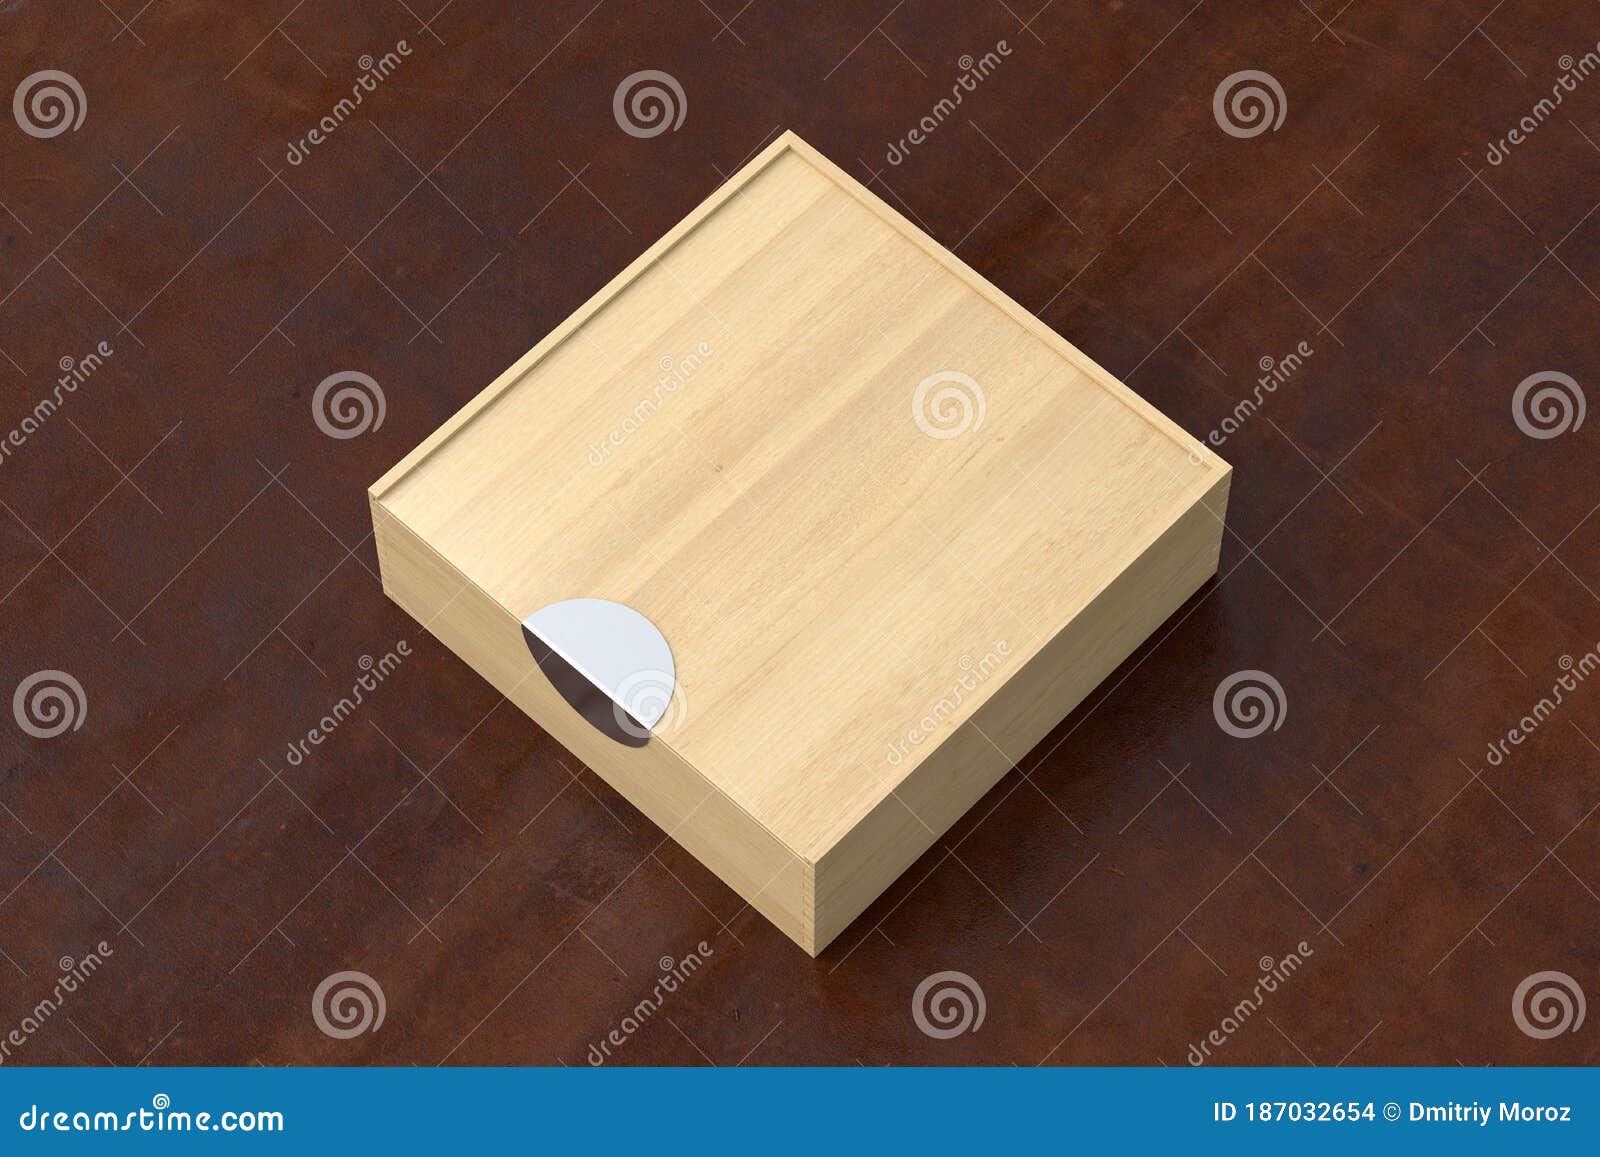 Wooden Box With Slide Lid